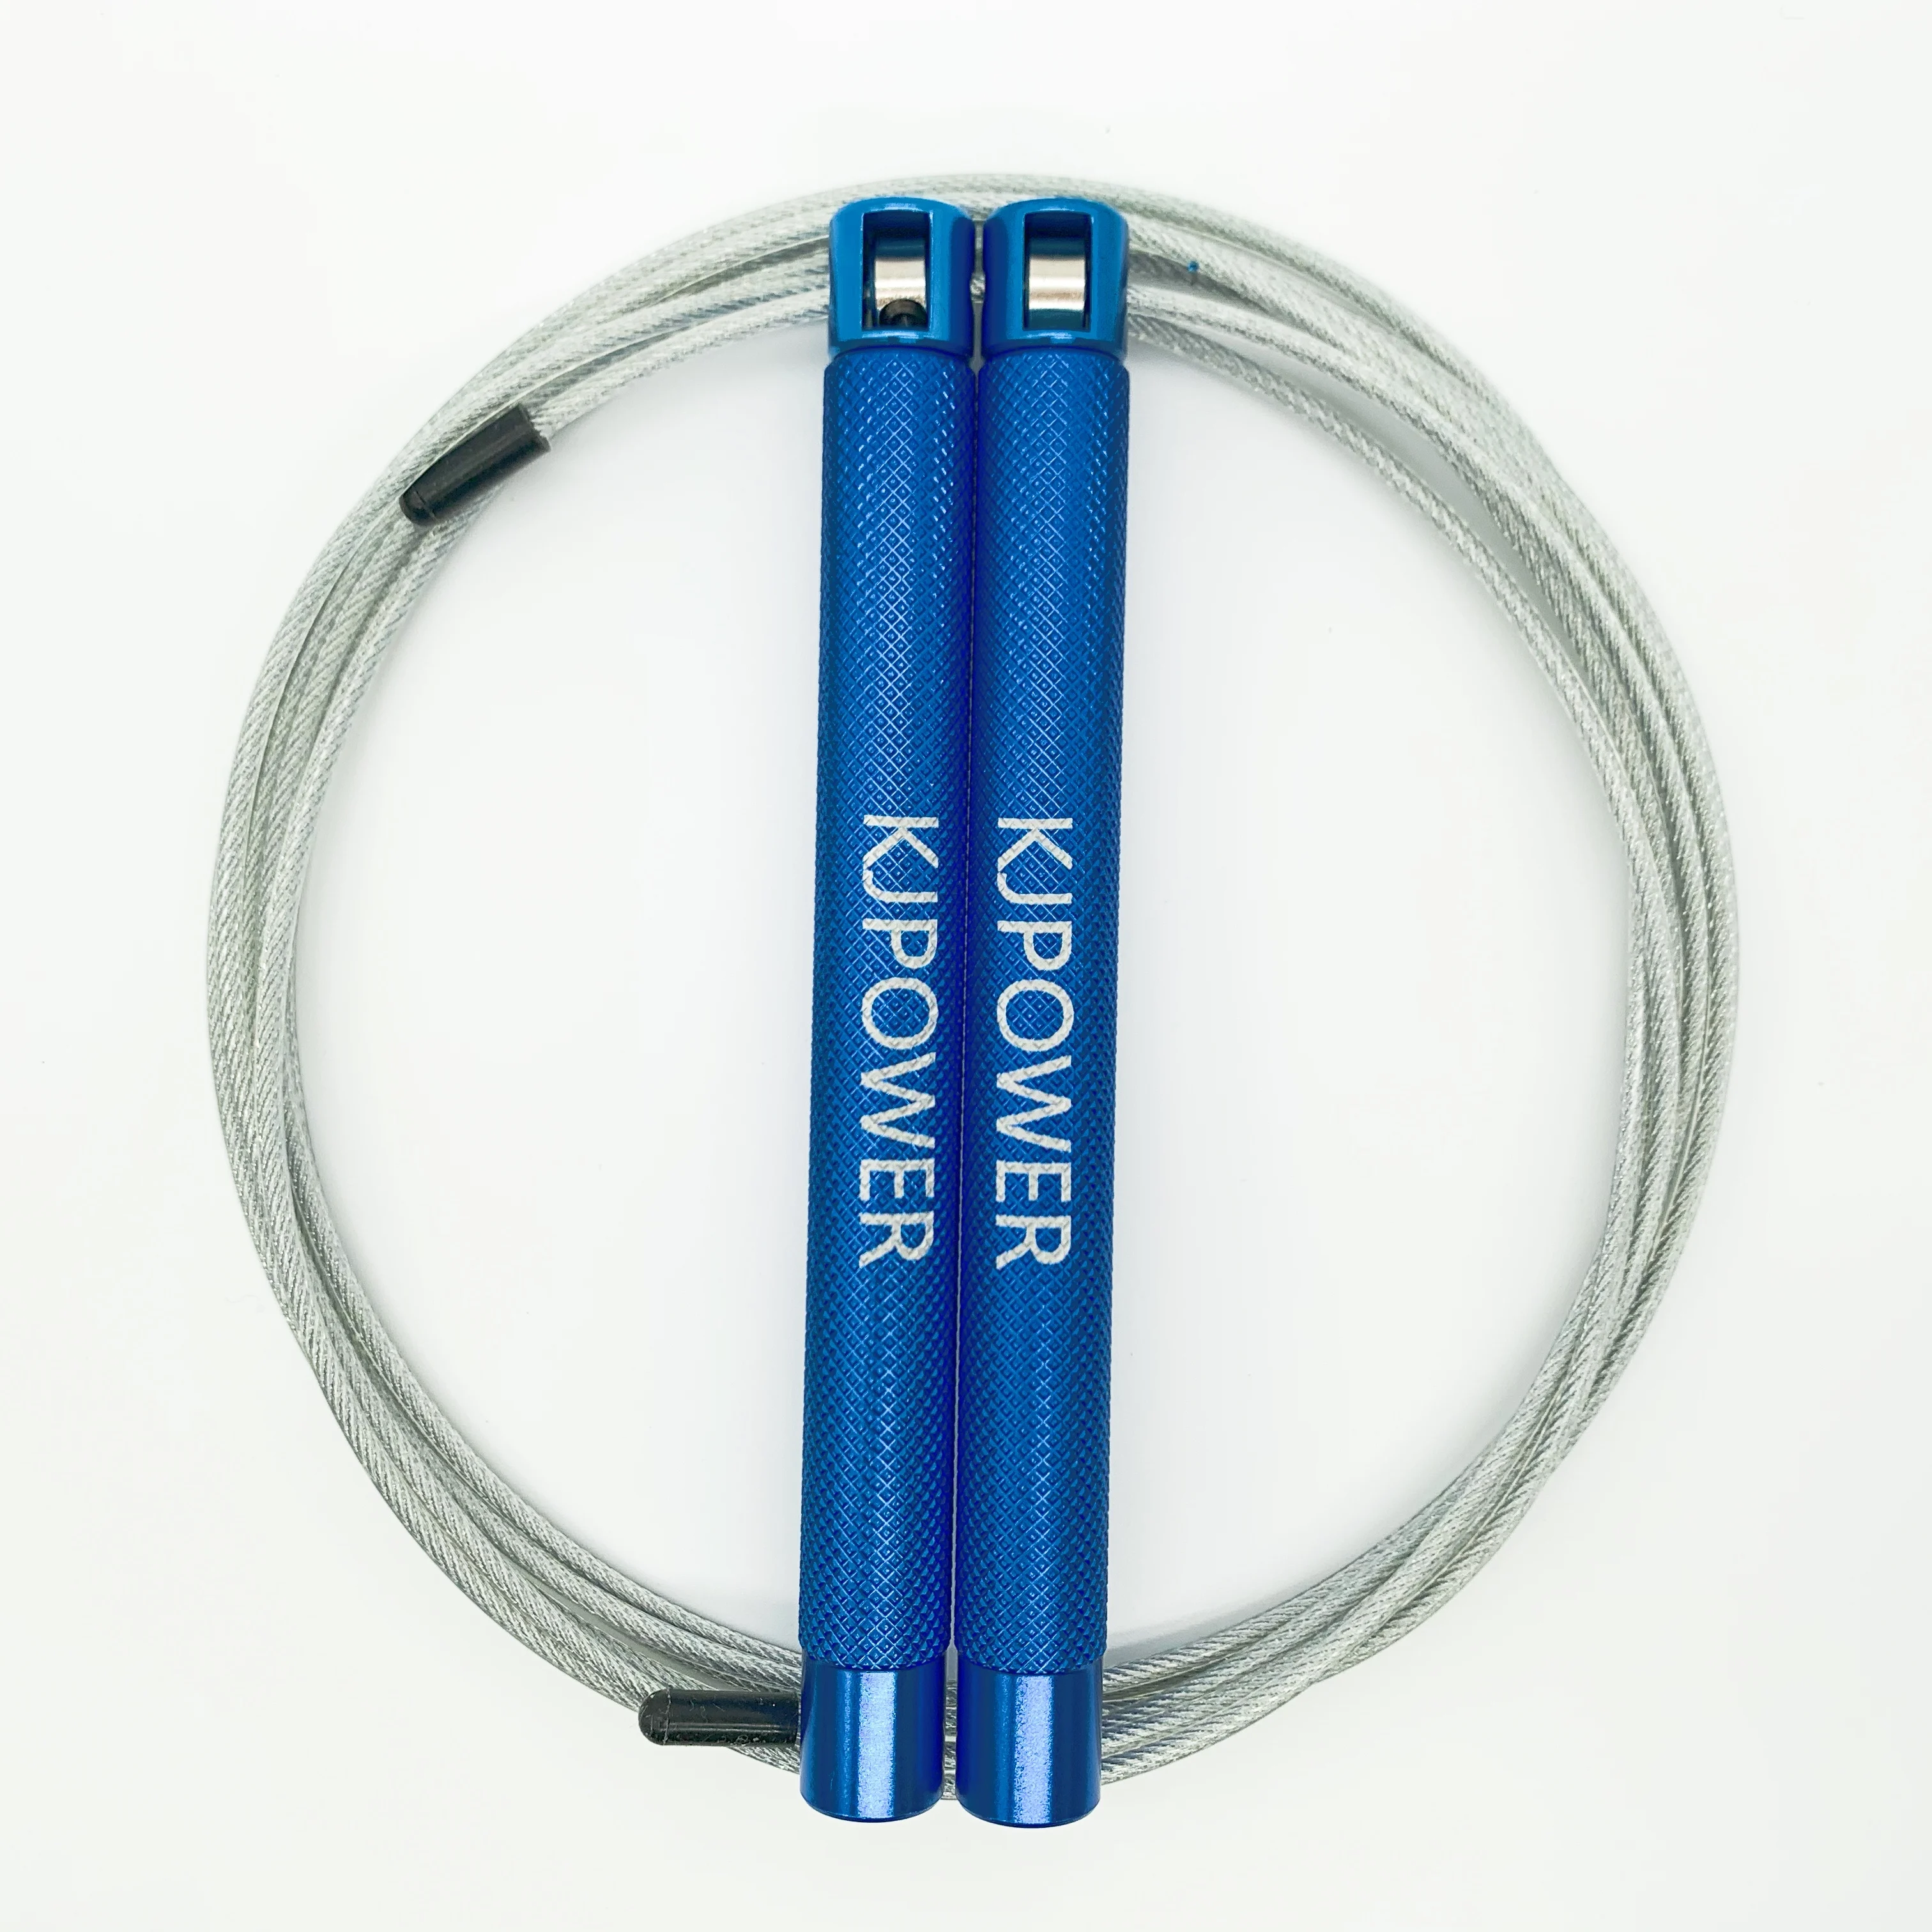 

Students fitness rpm aluminum speed rope jump rope bearing skipping ropes with logo, Rose, blue and black or customized